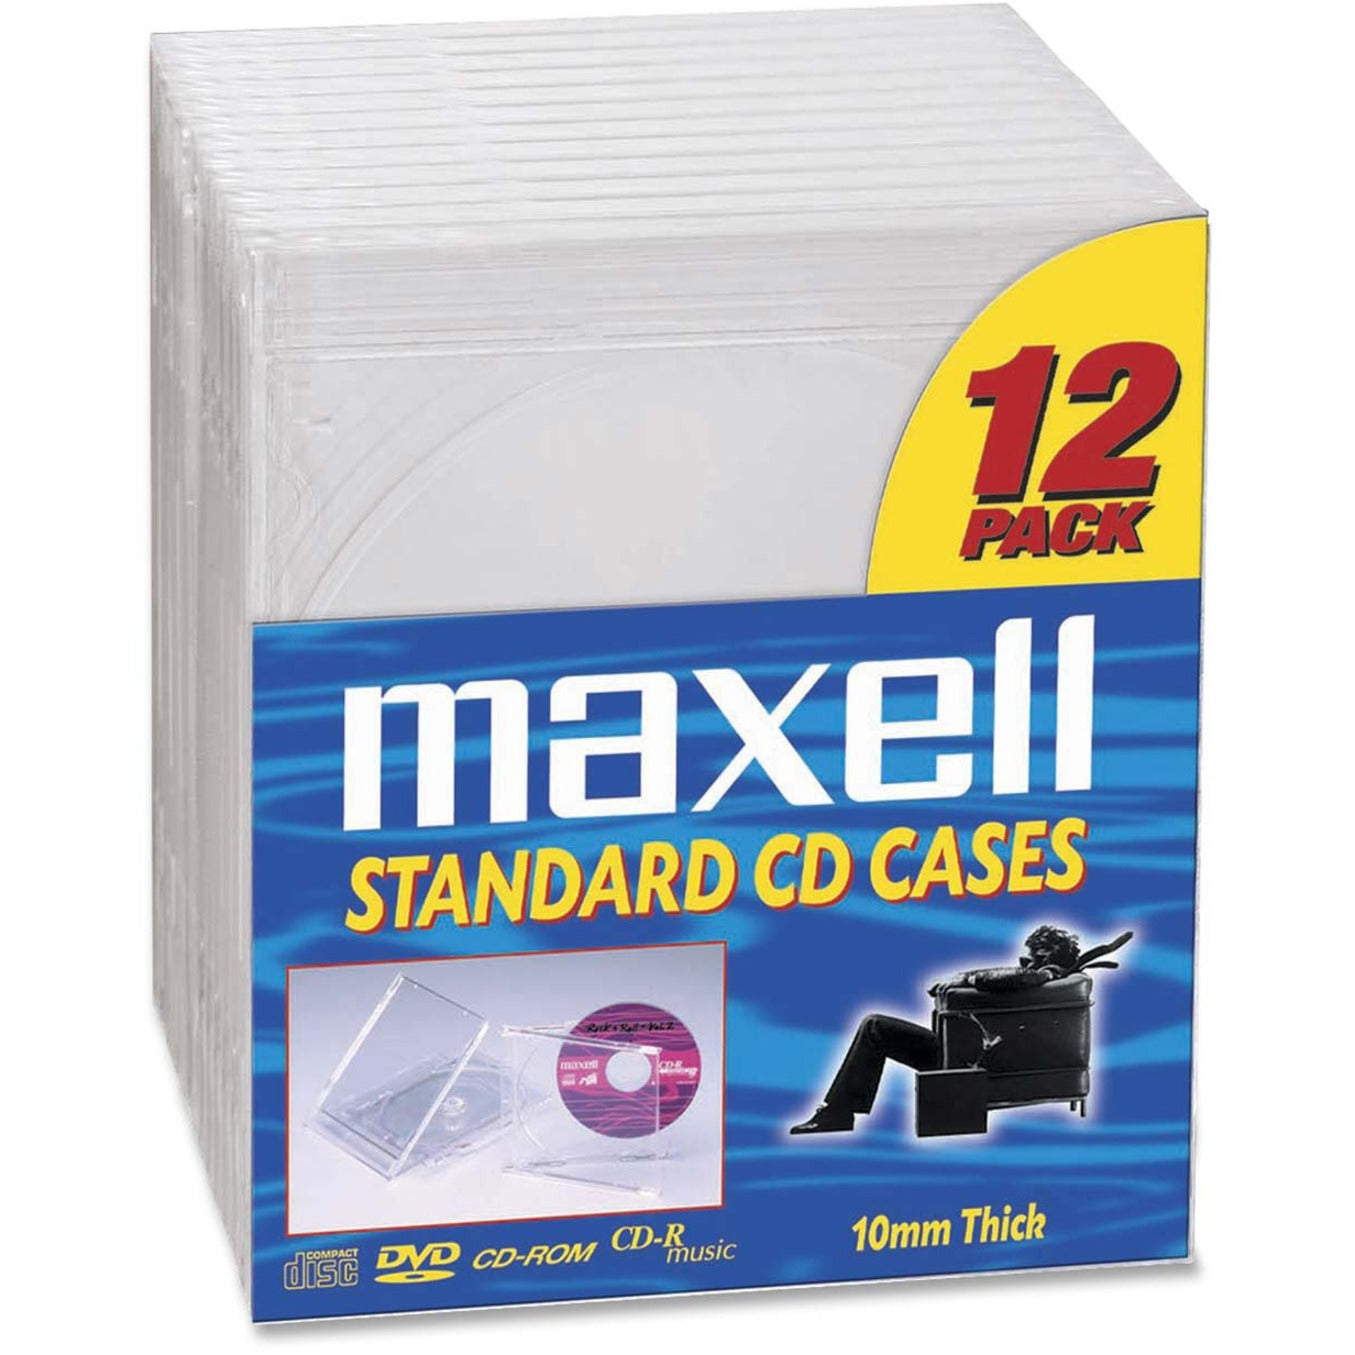 Maxell 190069 CD/DVD Jewel Cases CD-360, 12-Pack, Clear Plastic, Dust Proof